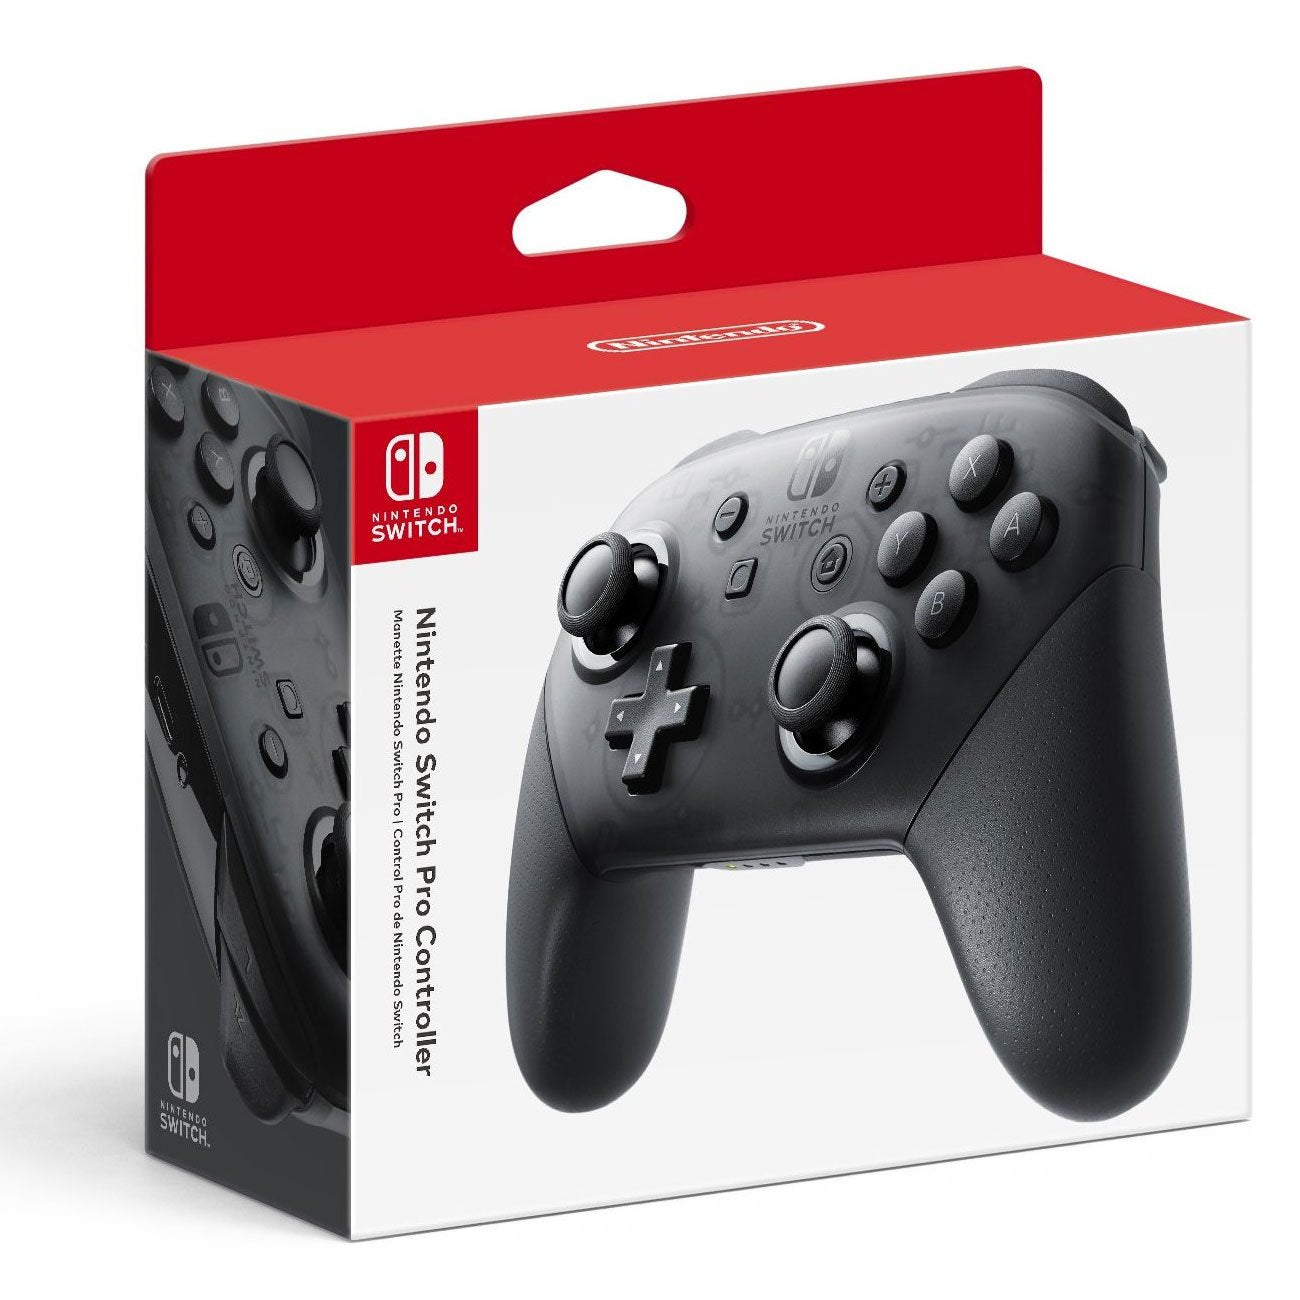 Nintendo Switch Console Animal Crossing: New Horizons Edition with Extra Wireless Controller, New Super Mario Bros. U Deluxe and Screen Cleaning Cloth - Pro-Distributing